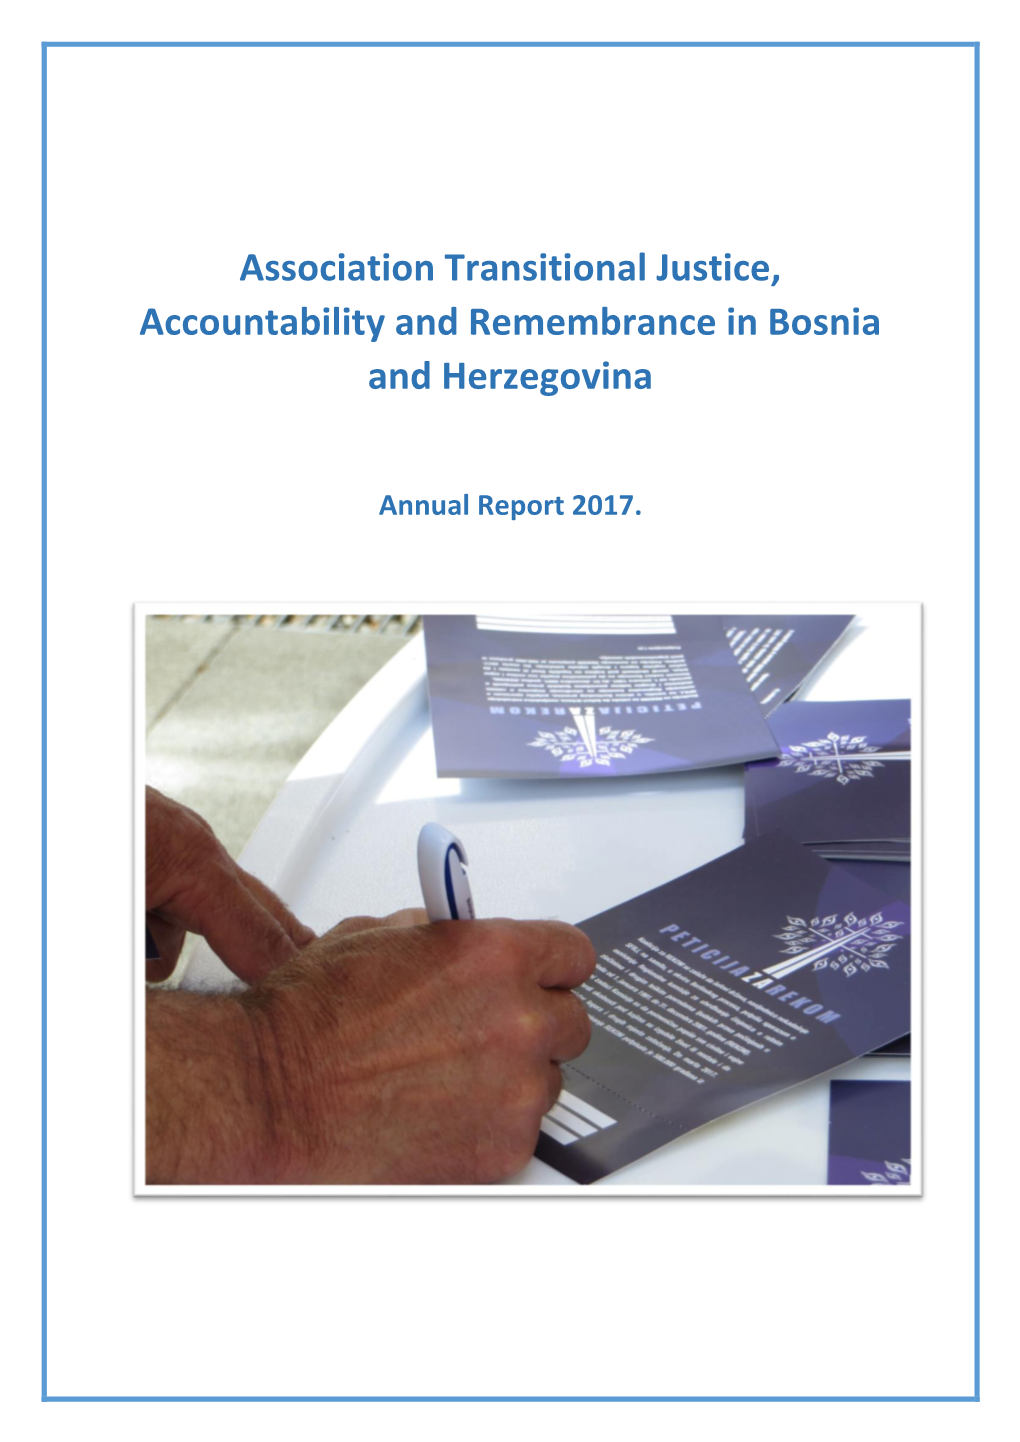 Association Transitional Justice, Accountability and Remembrance in Bosnia and Herzegovina